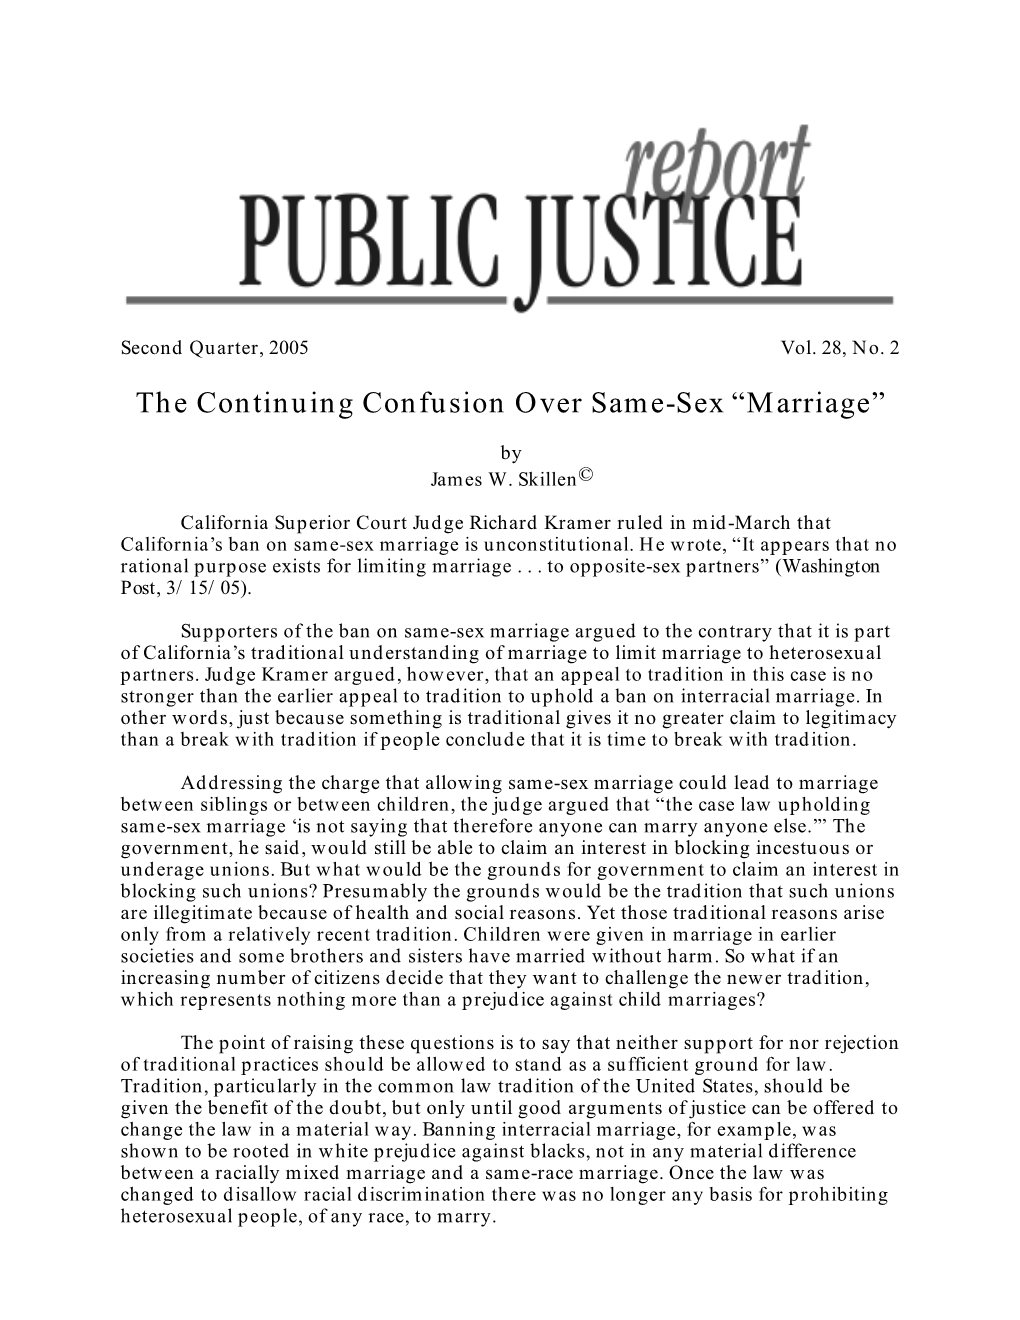 The Continuing Confusion Over Same-Sex “Marriage”